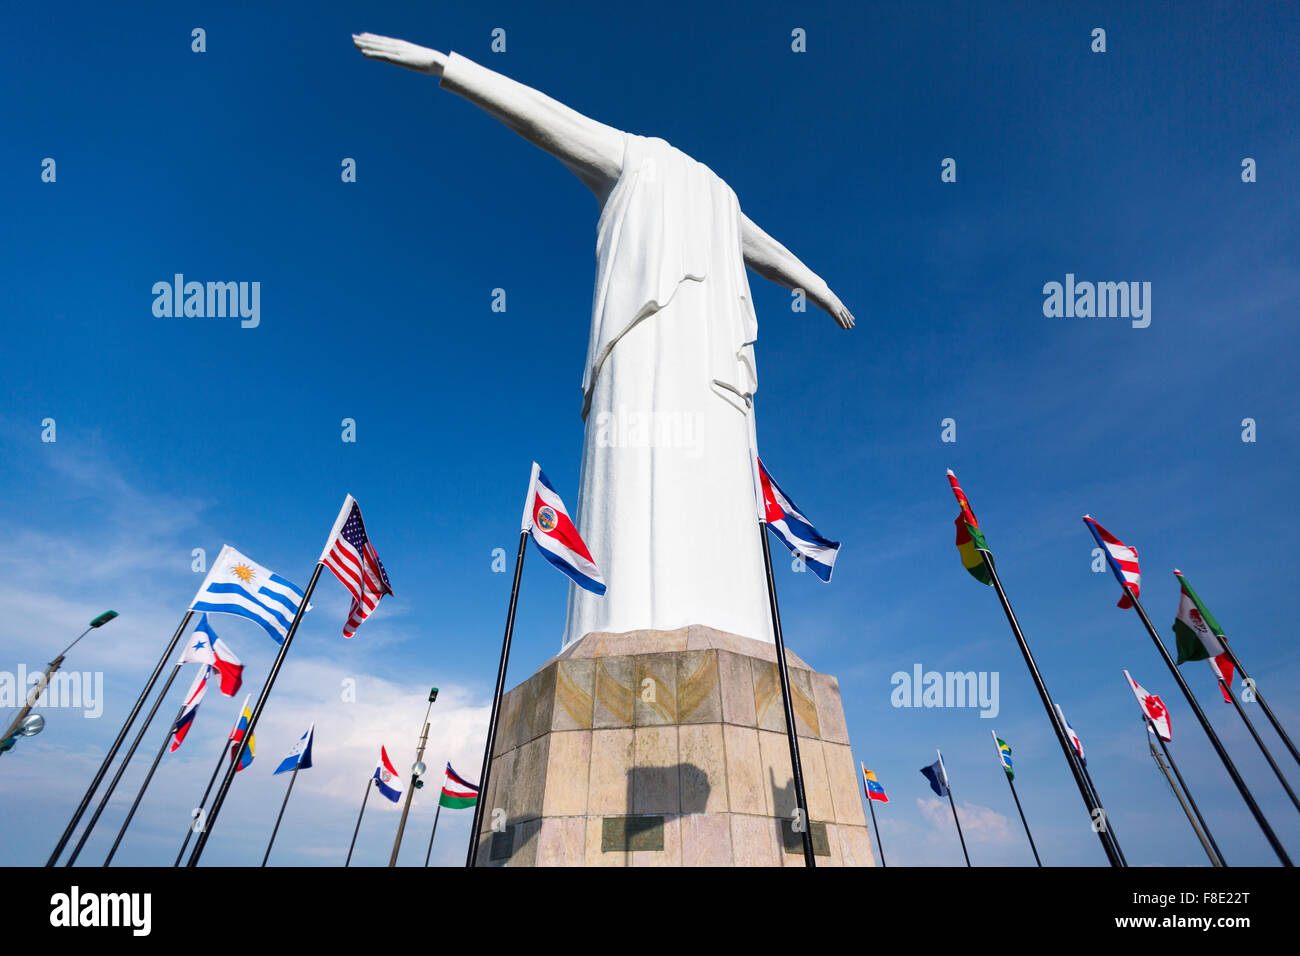 Cristo del Rey statue of Cali against a blue sky with international flags waving around. Colombia Stock Photo